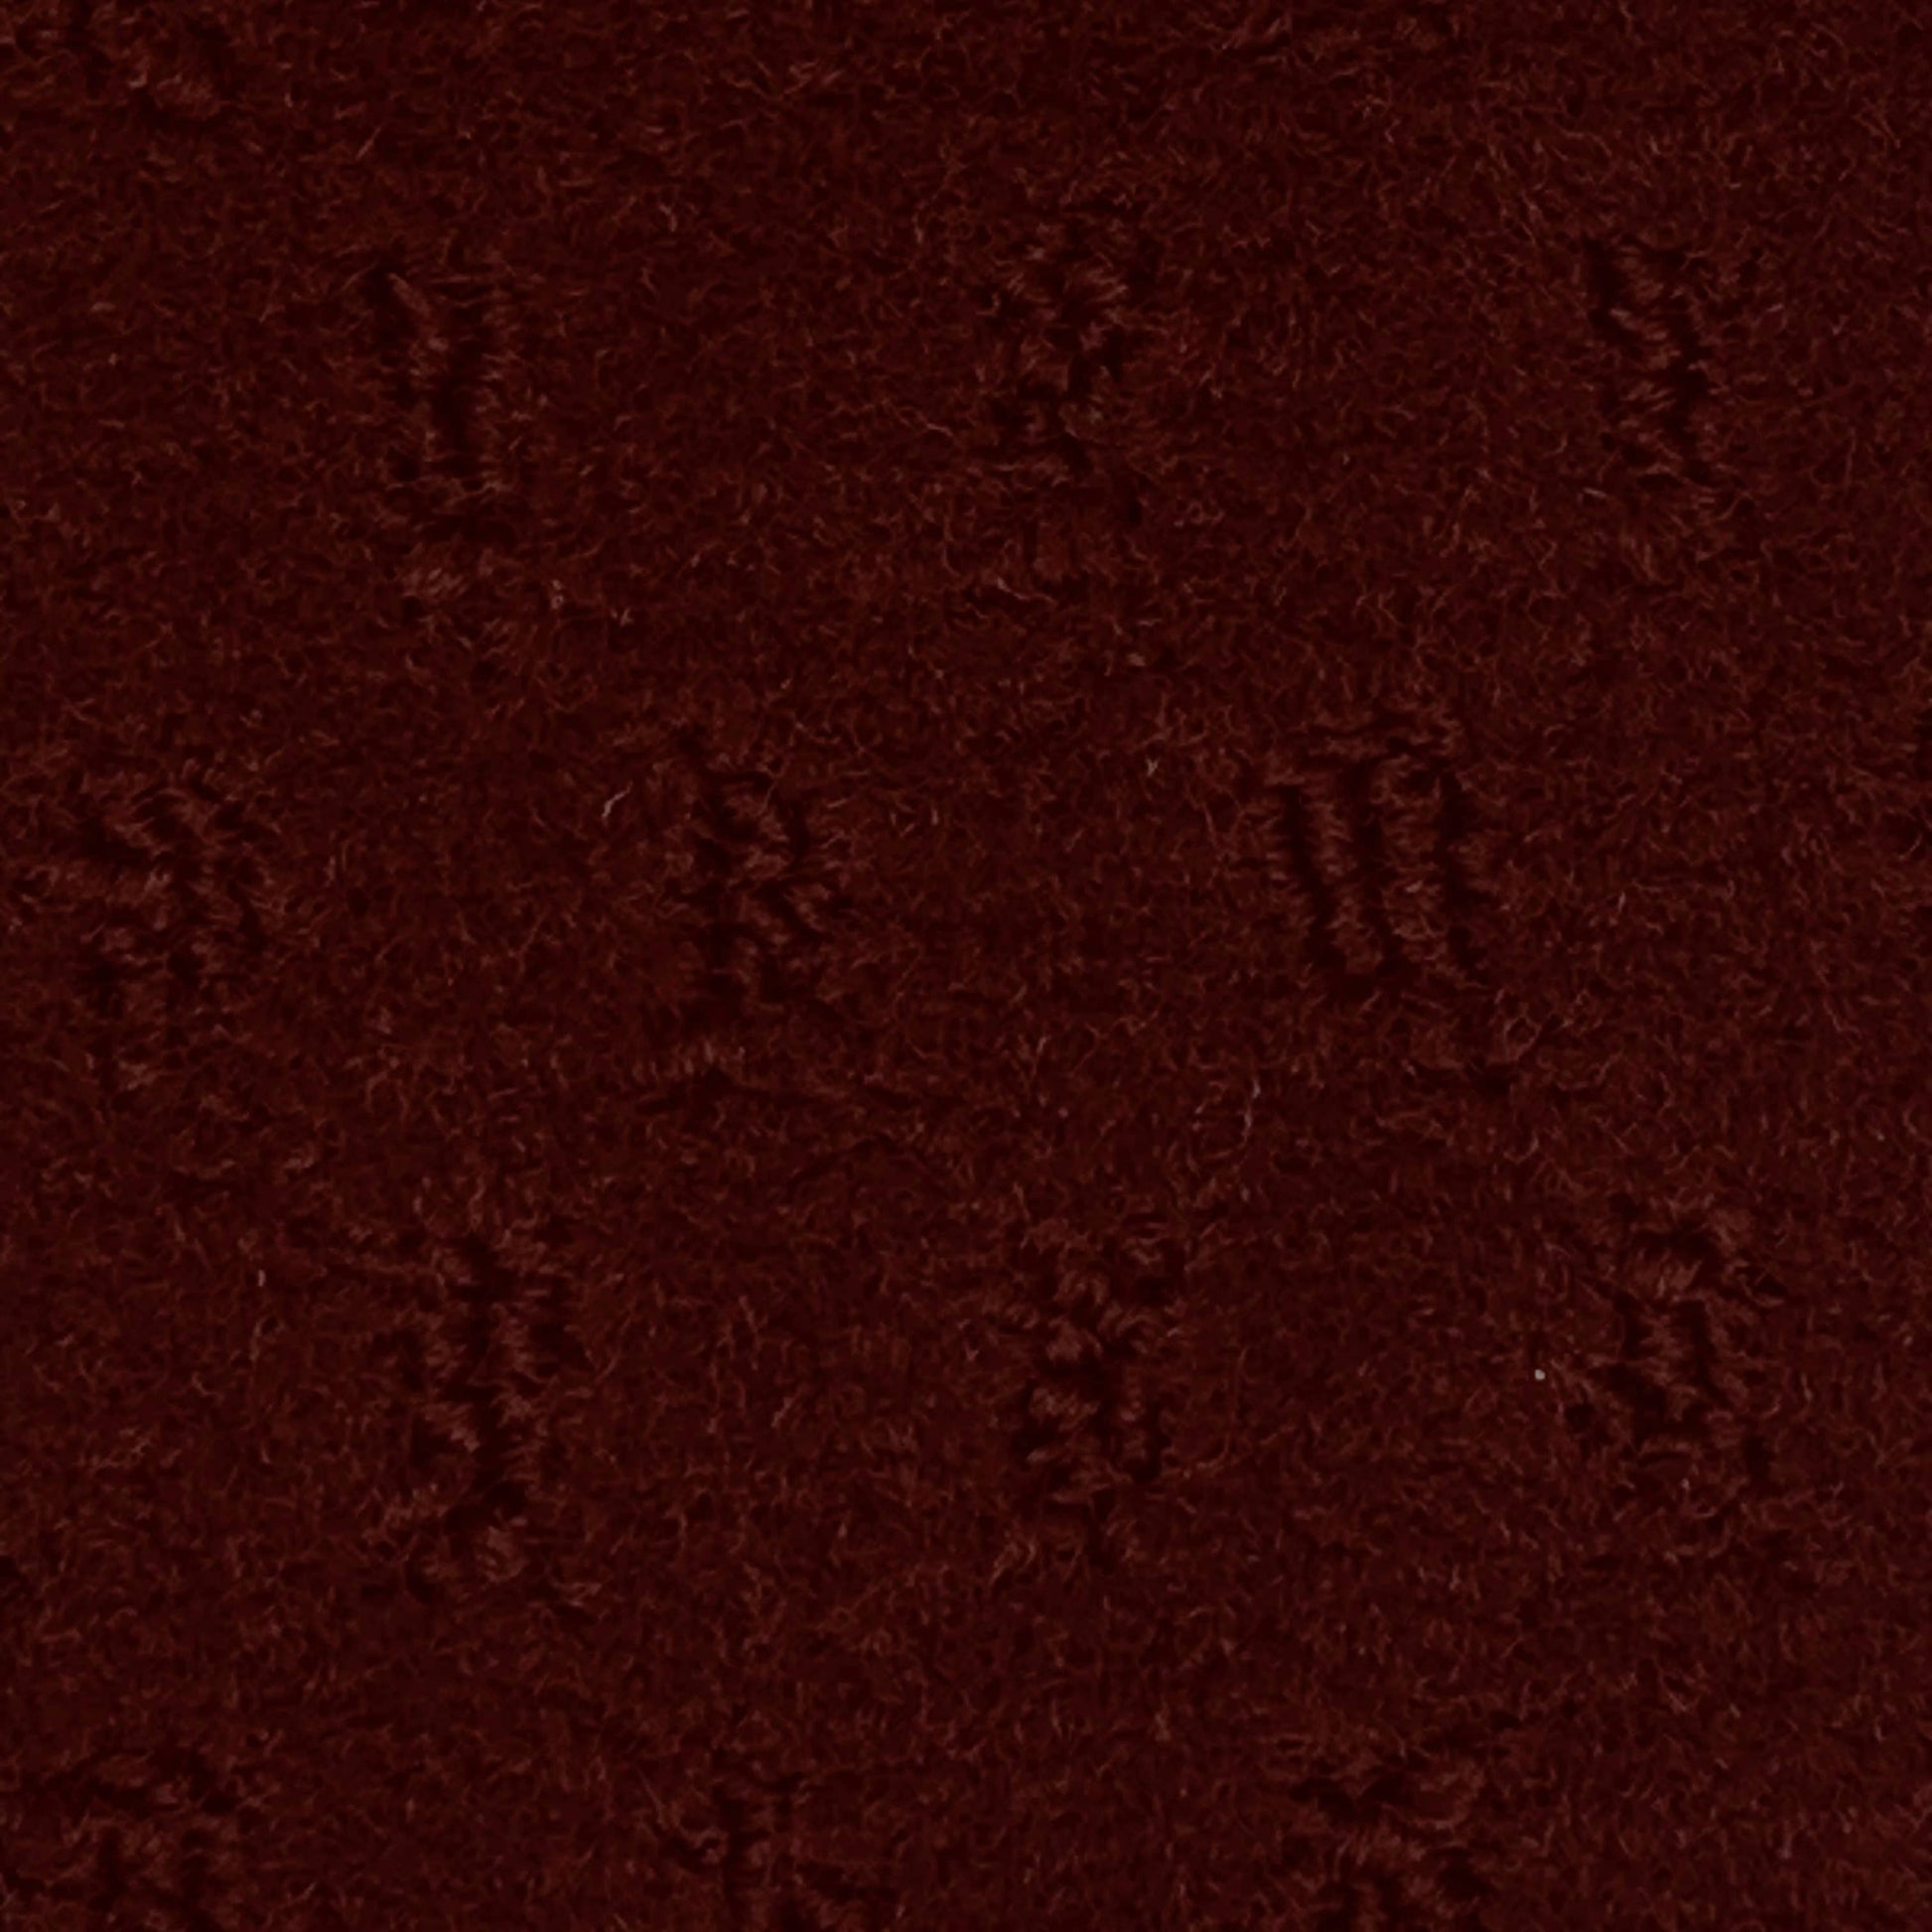 Red textured boat carpet